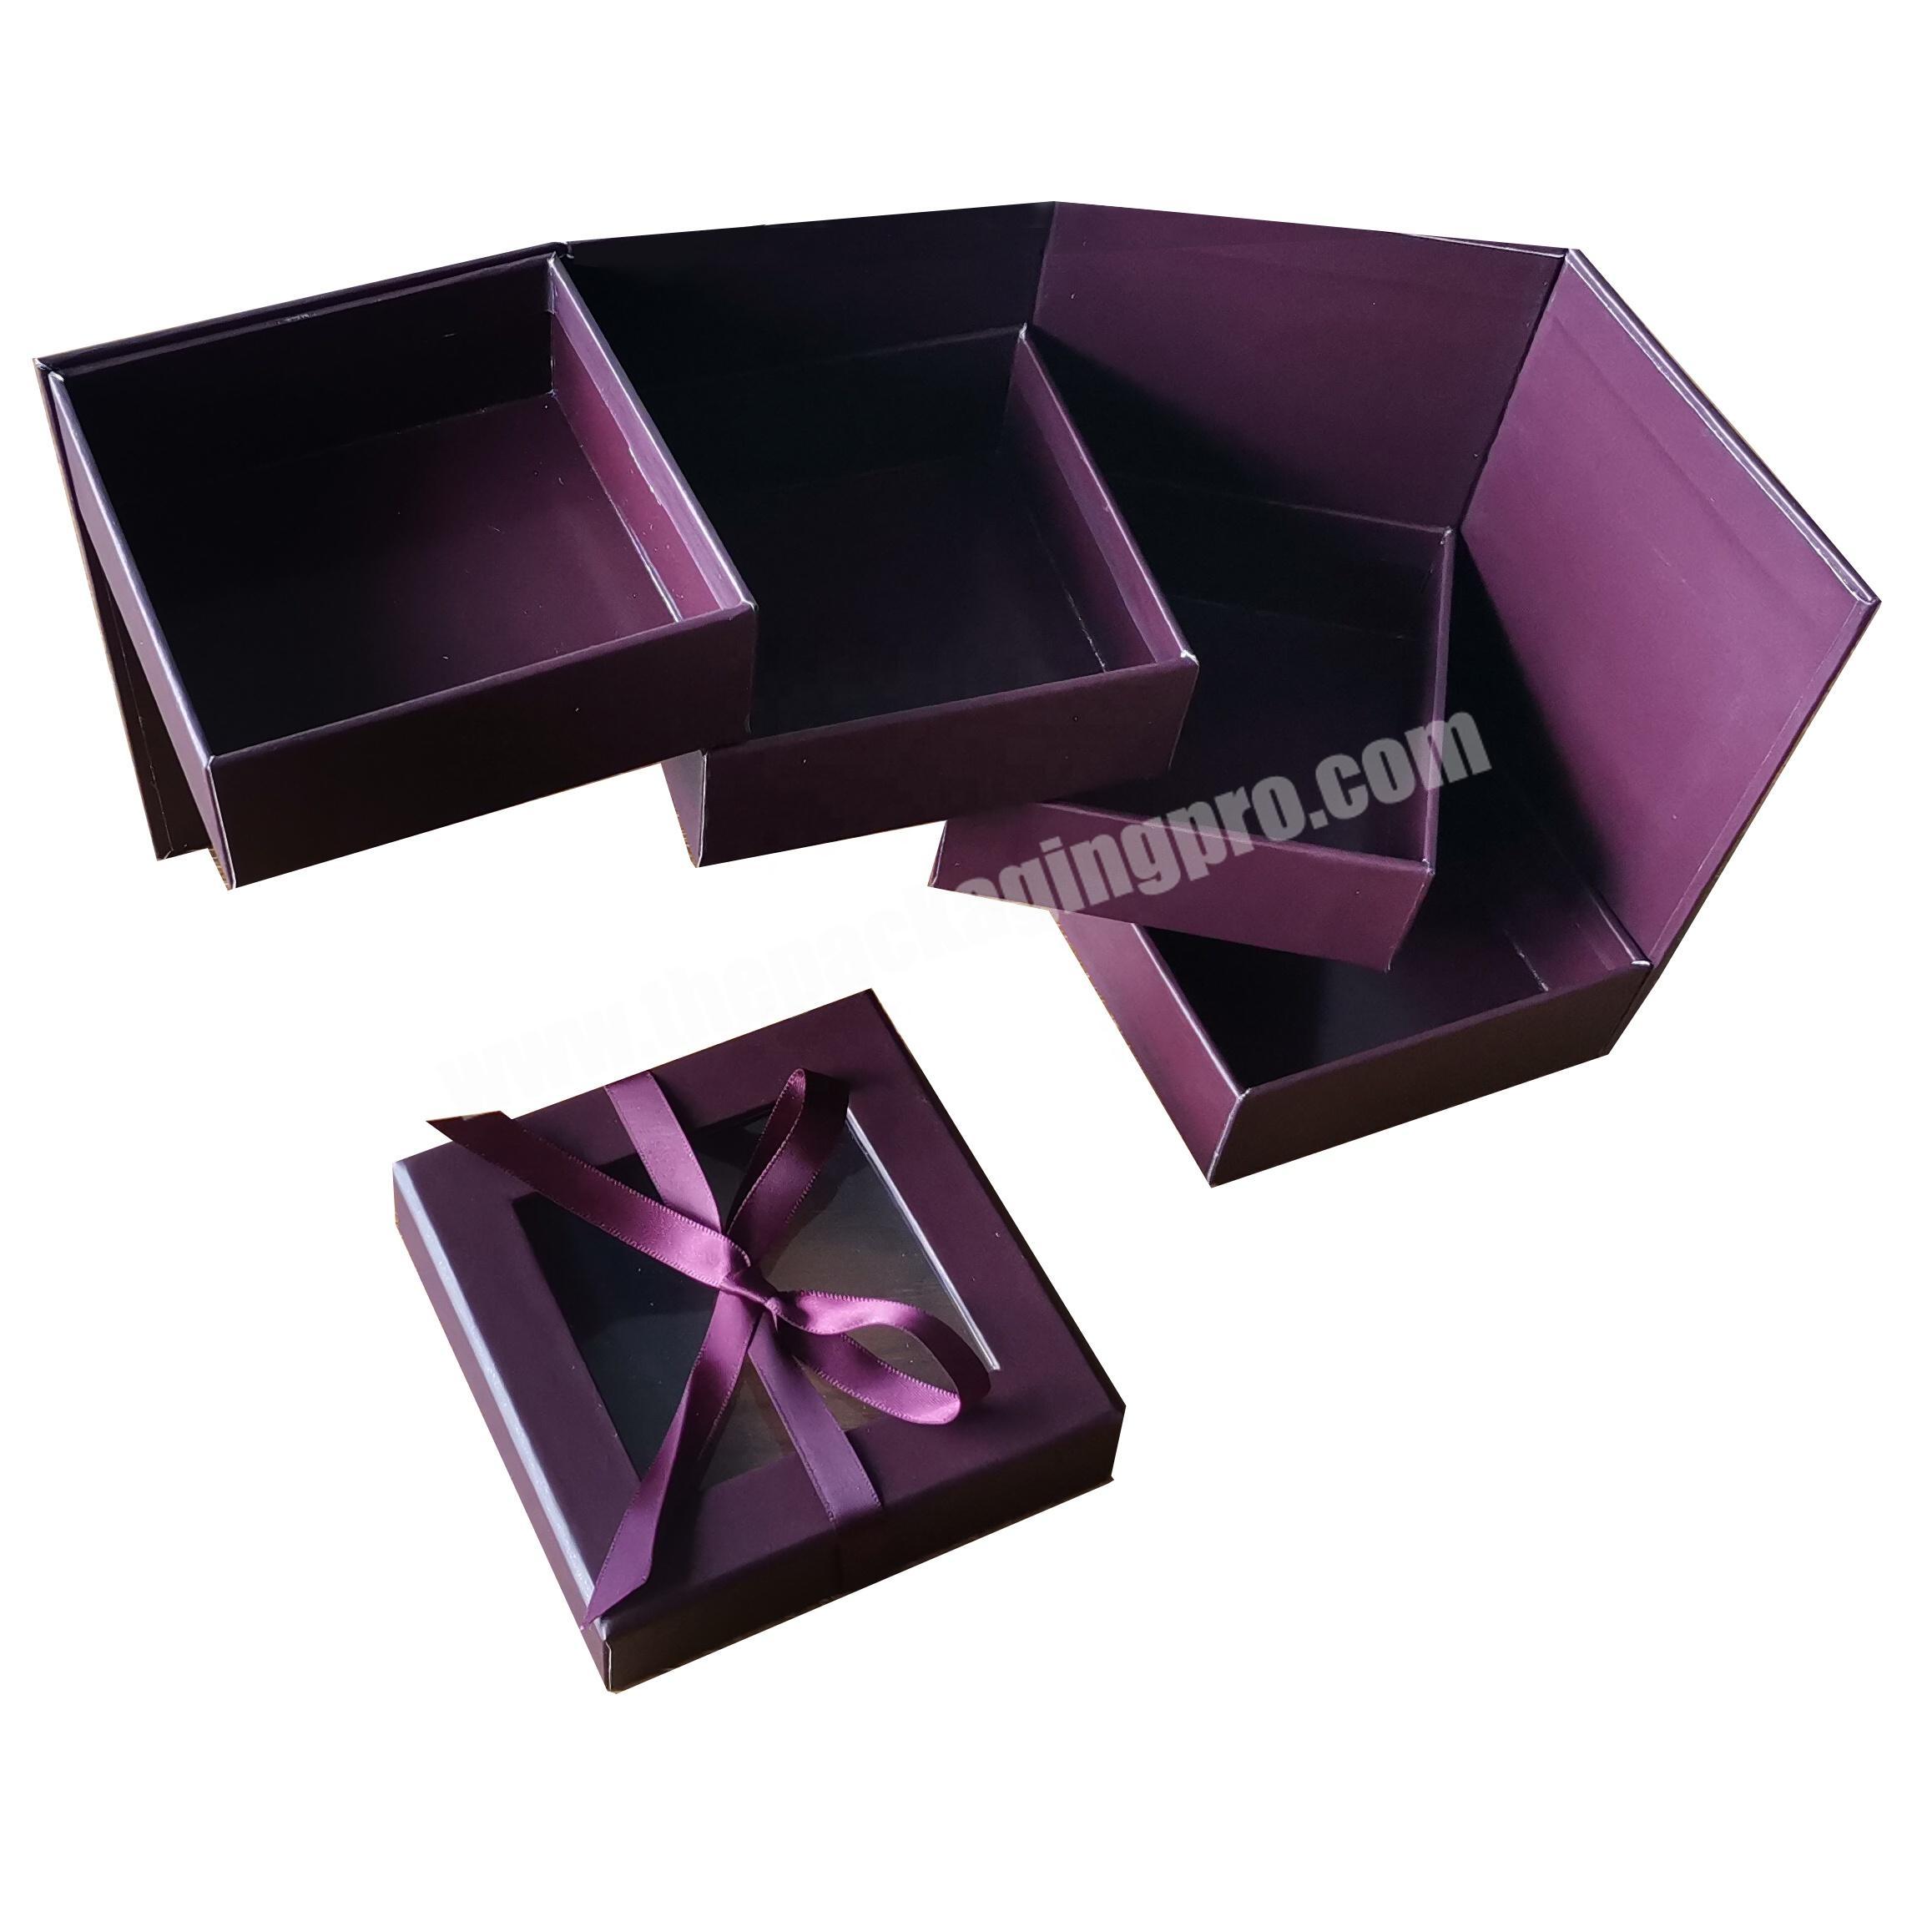 Kexin fancy chocolate explosion double layer gift box offset printing cardboard 4 Layer gift box tier boxes